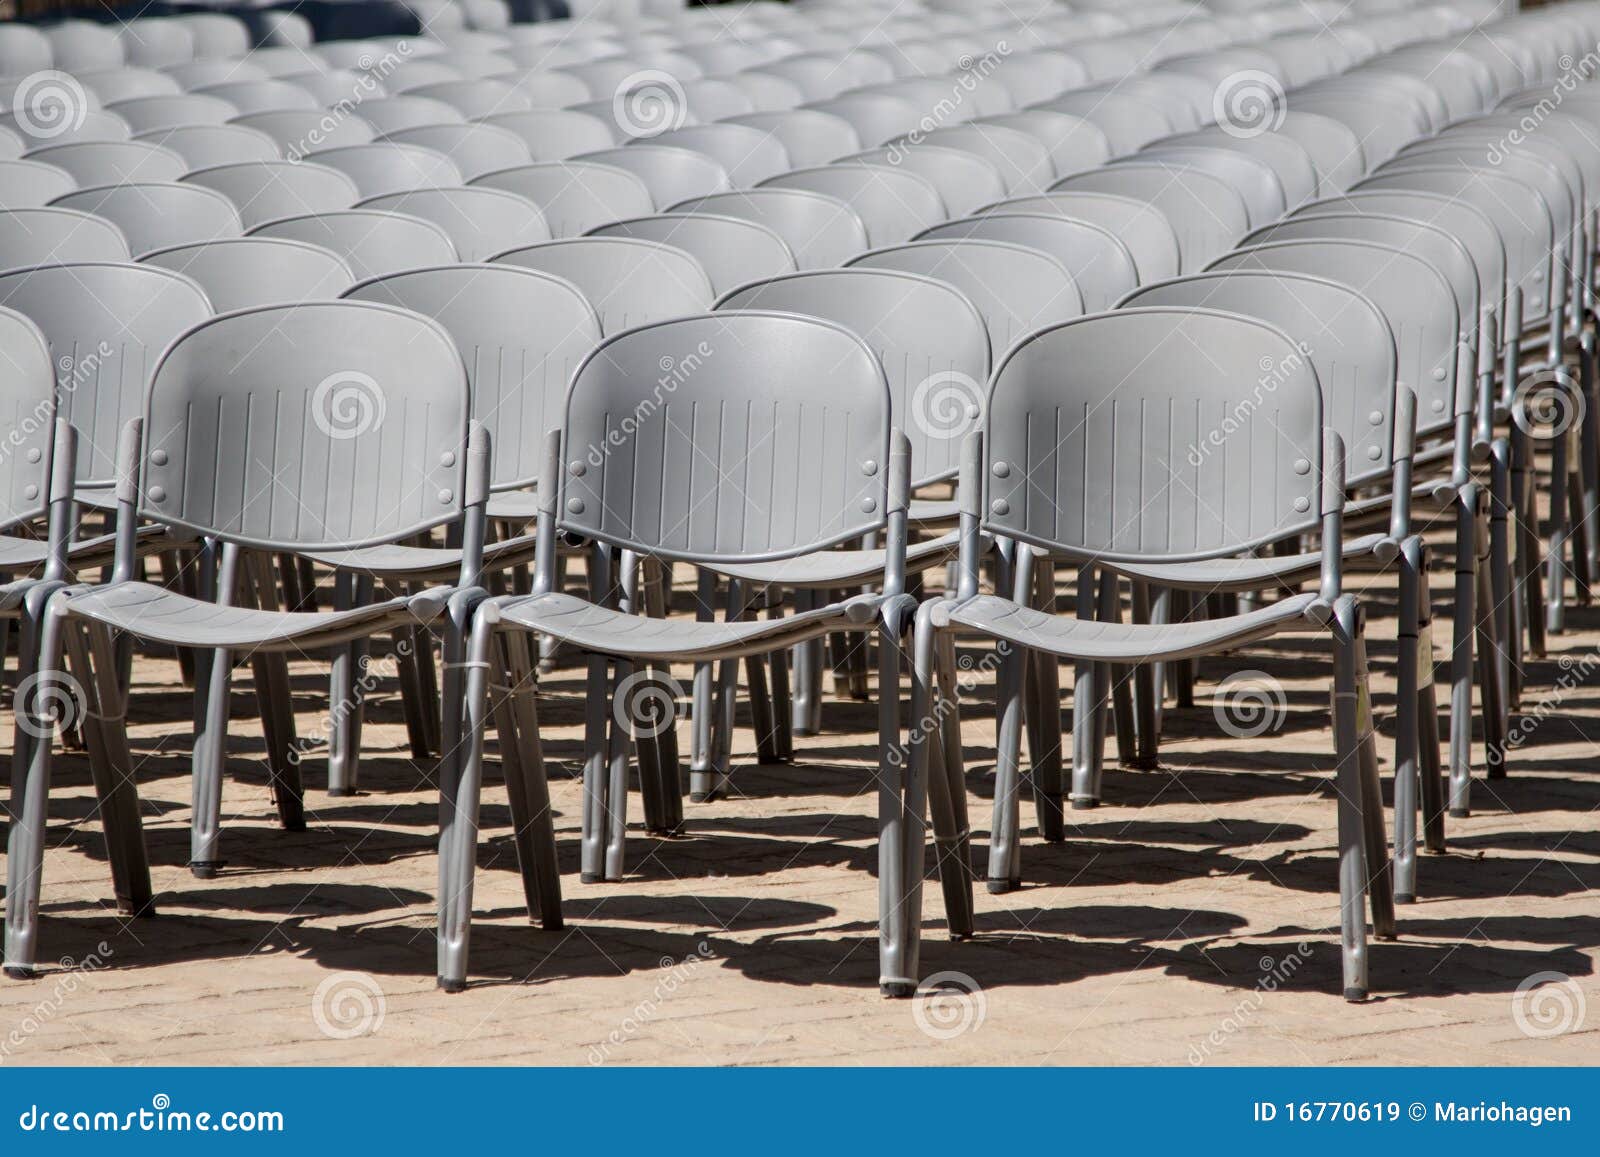 Pile Of Gray Chairs Stock Image Image Of Guests Catalogs 16770619